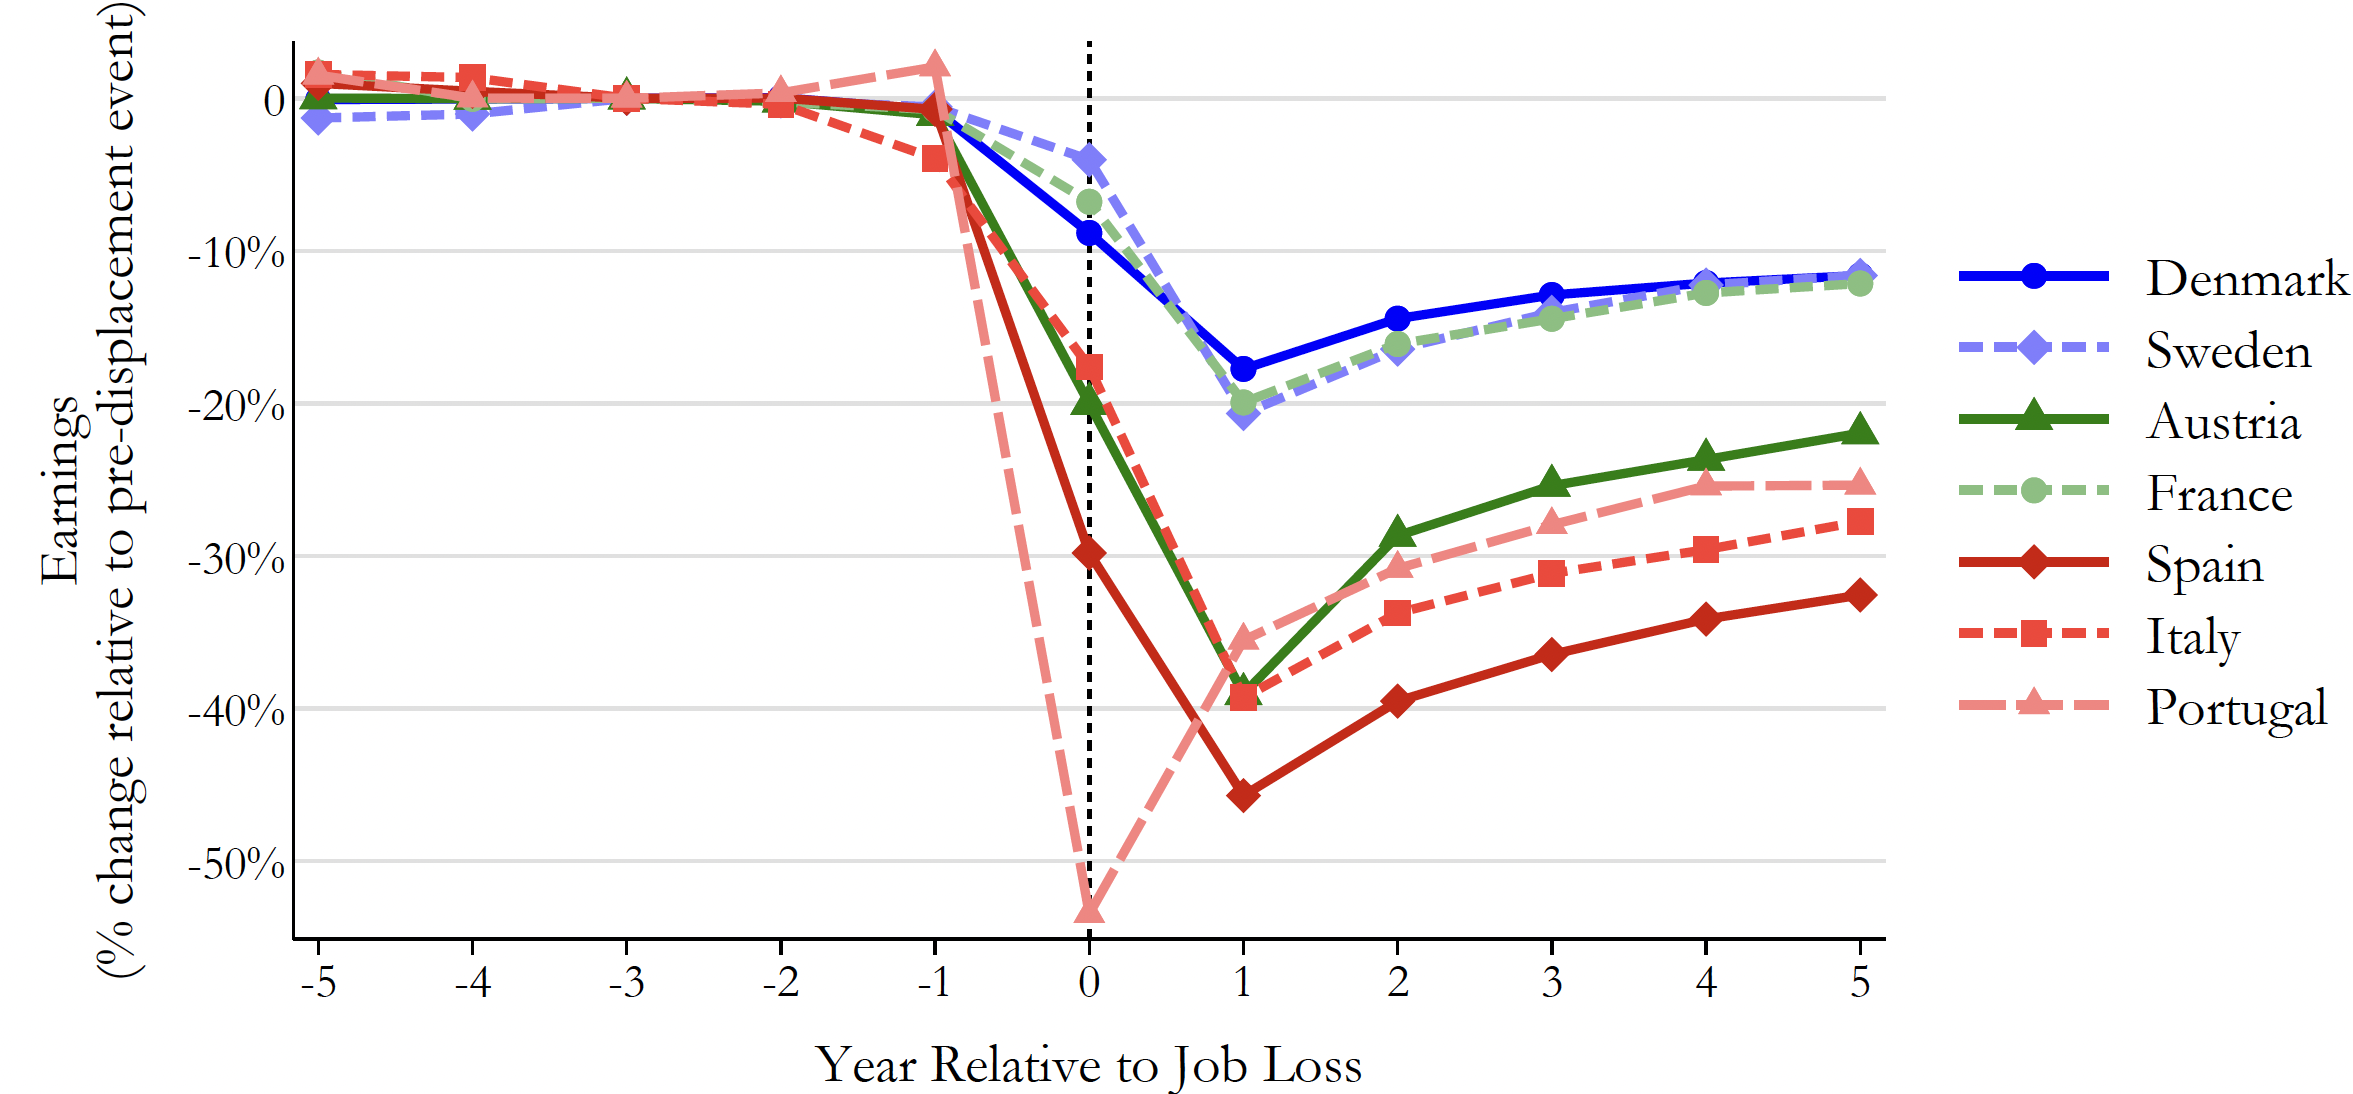 The unequal cost of job loss across countries 2